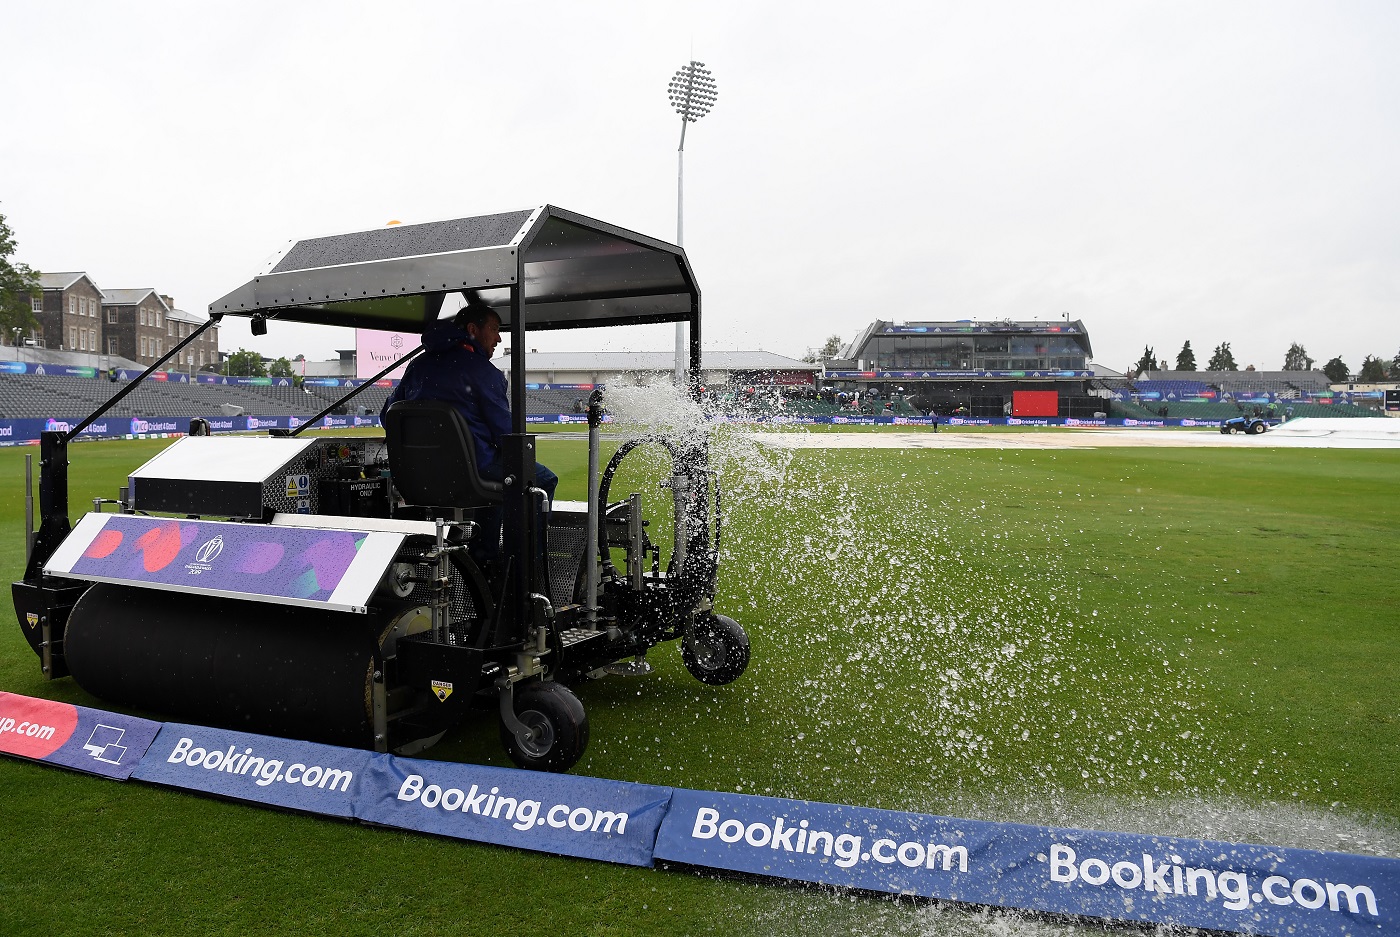 Pakistan Sri Lanka Game Got Washed Out, Pakistan Meets Australia In The World Cup, A List Of Miracles That Pakistan Requires To Make It To The Semi-final Stage, #PAKvSL